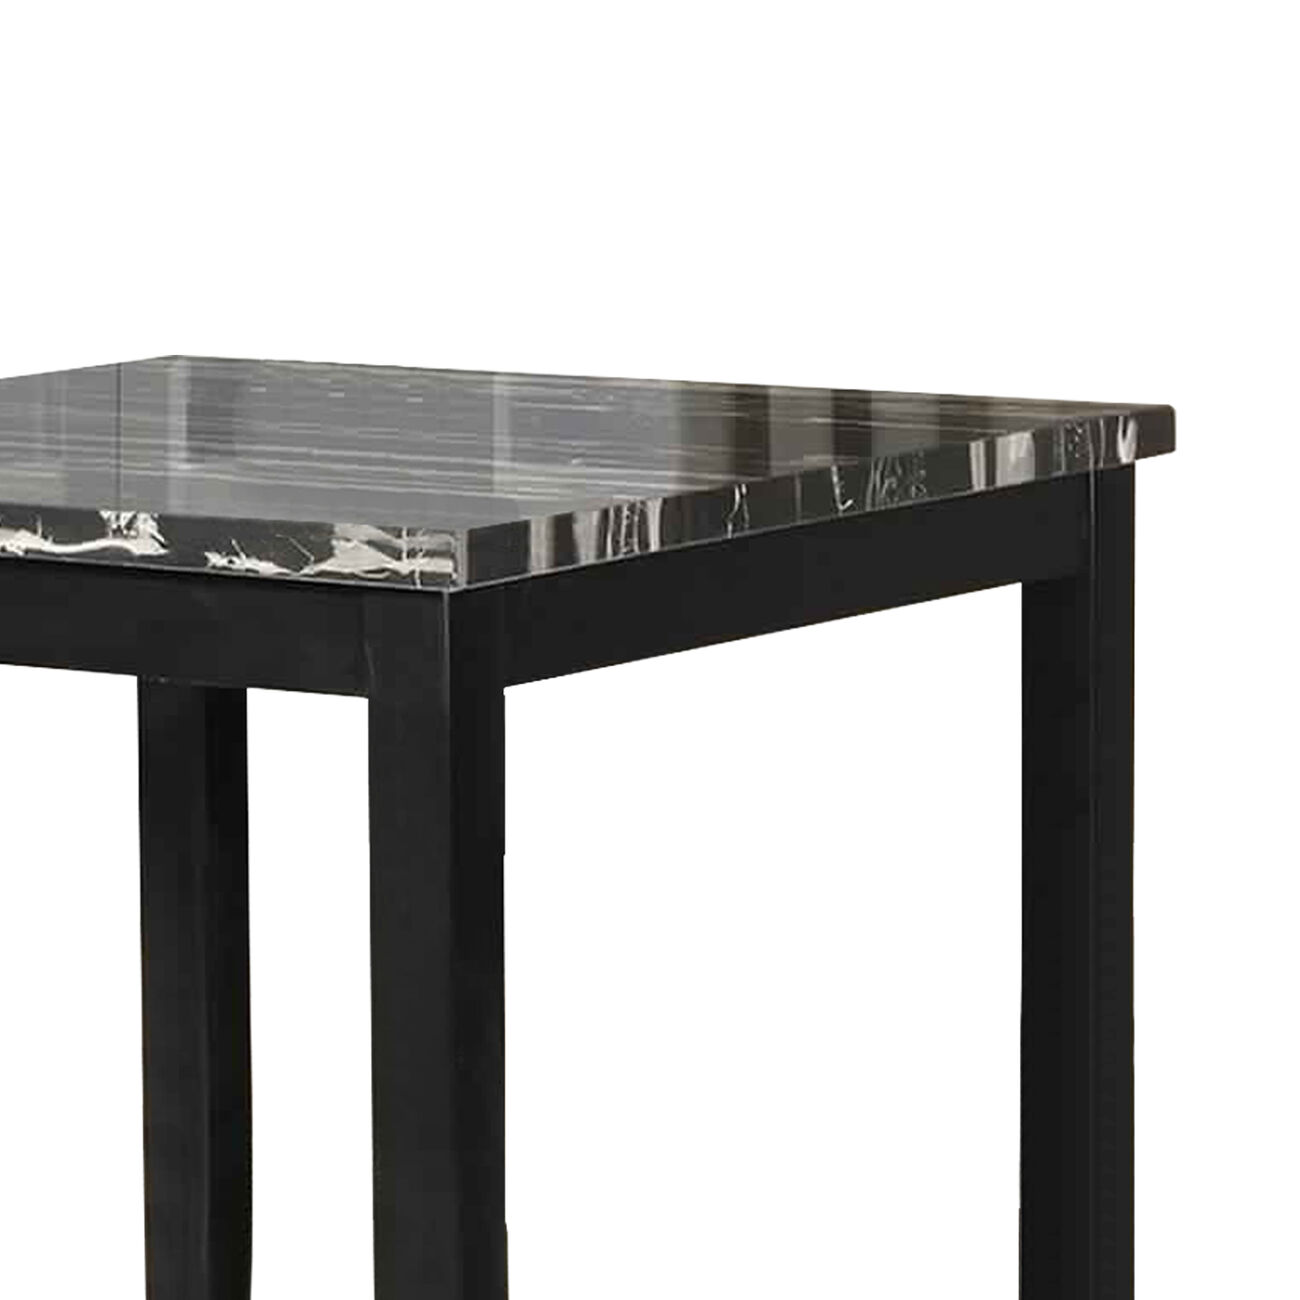 5 Piece Counter Height Dining Set with Faux Marble Tabletop, Black